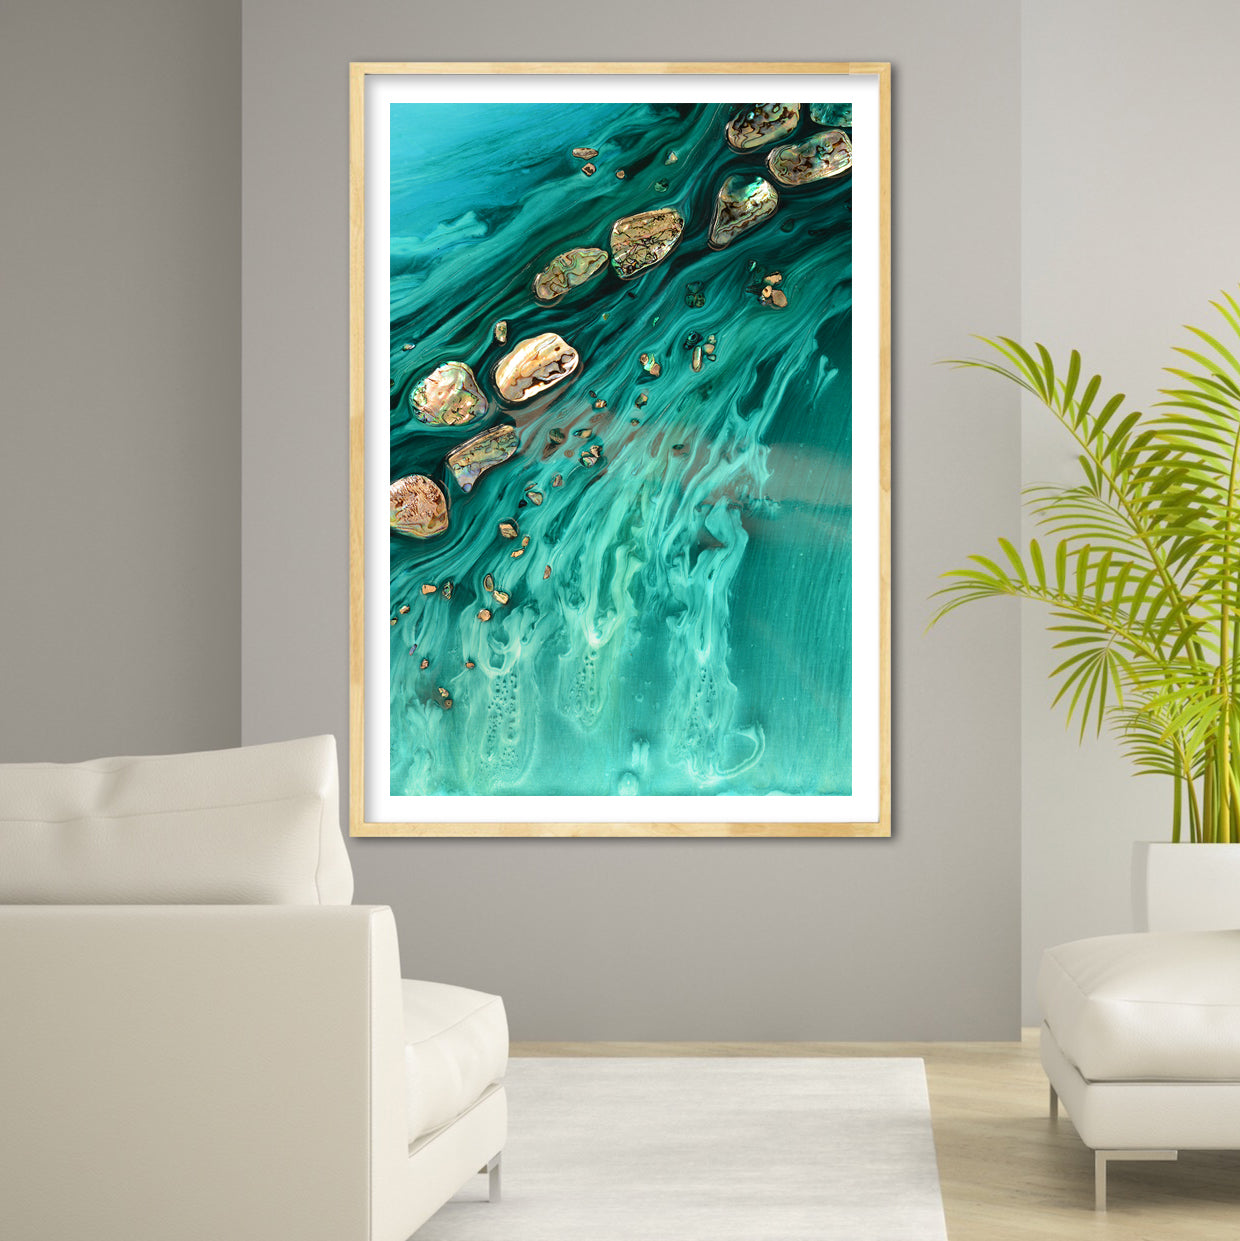 Abstract Ocean Artwork. Rise Above Seashells 1. Art Print. Antuanelle 4 Limited Edition Print